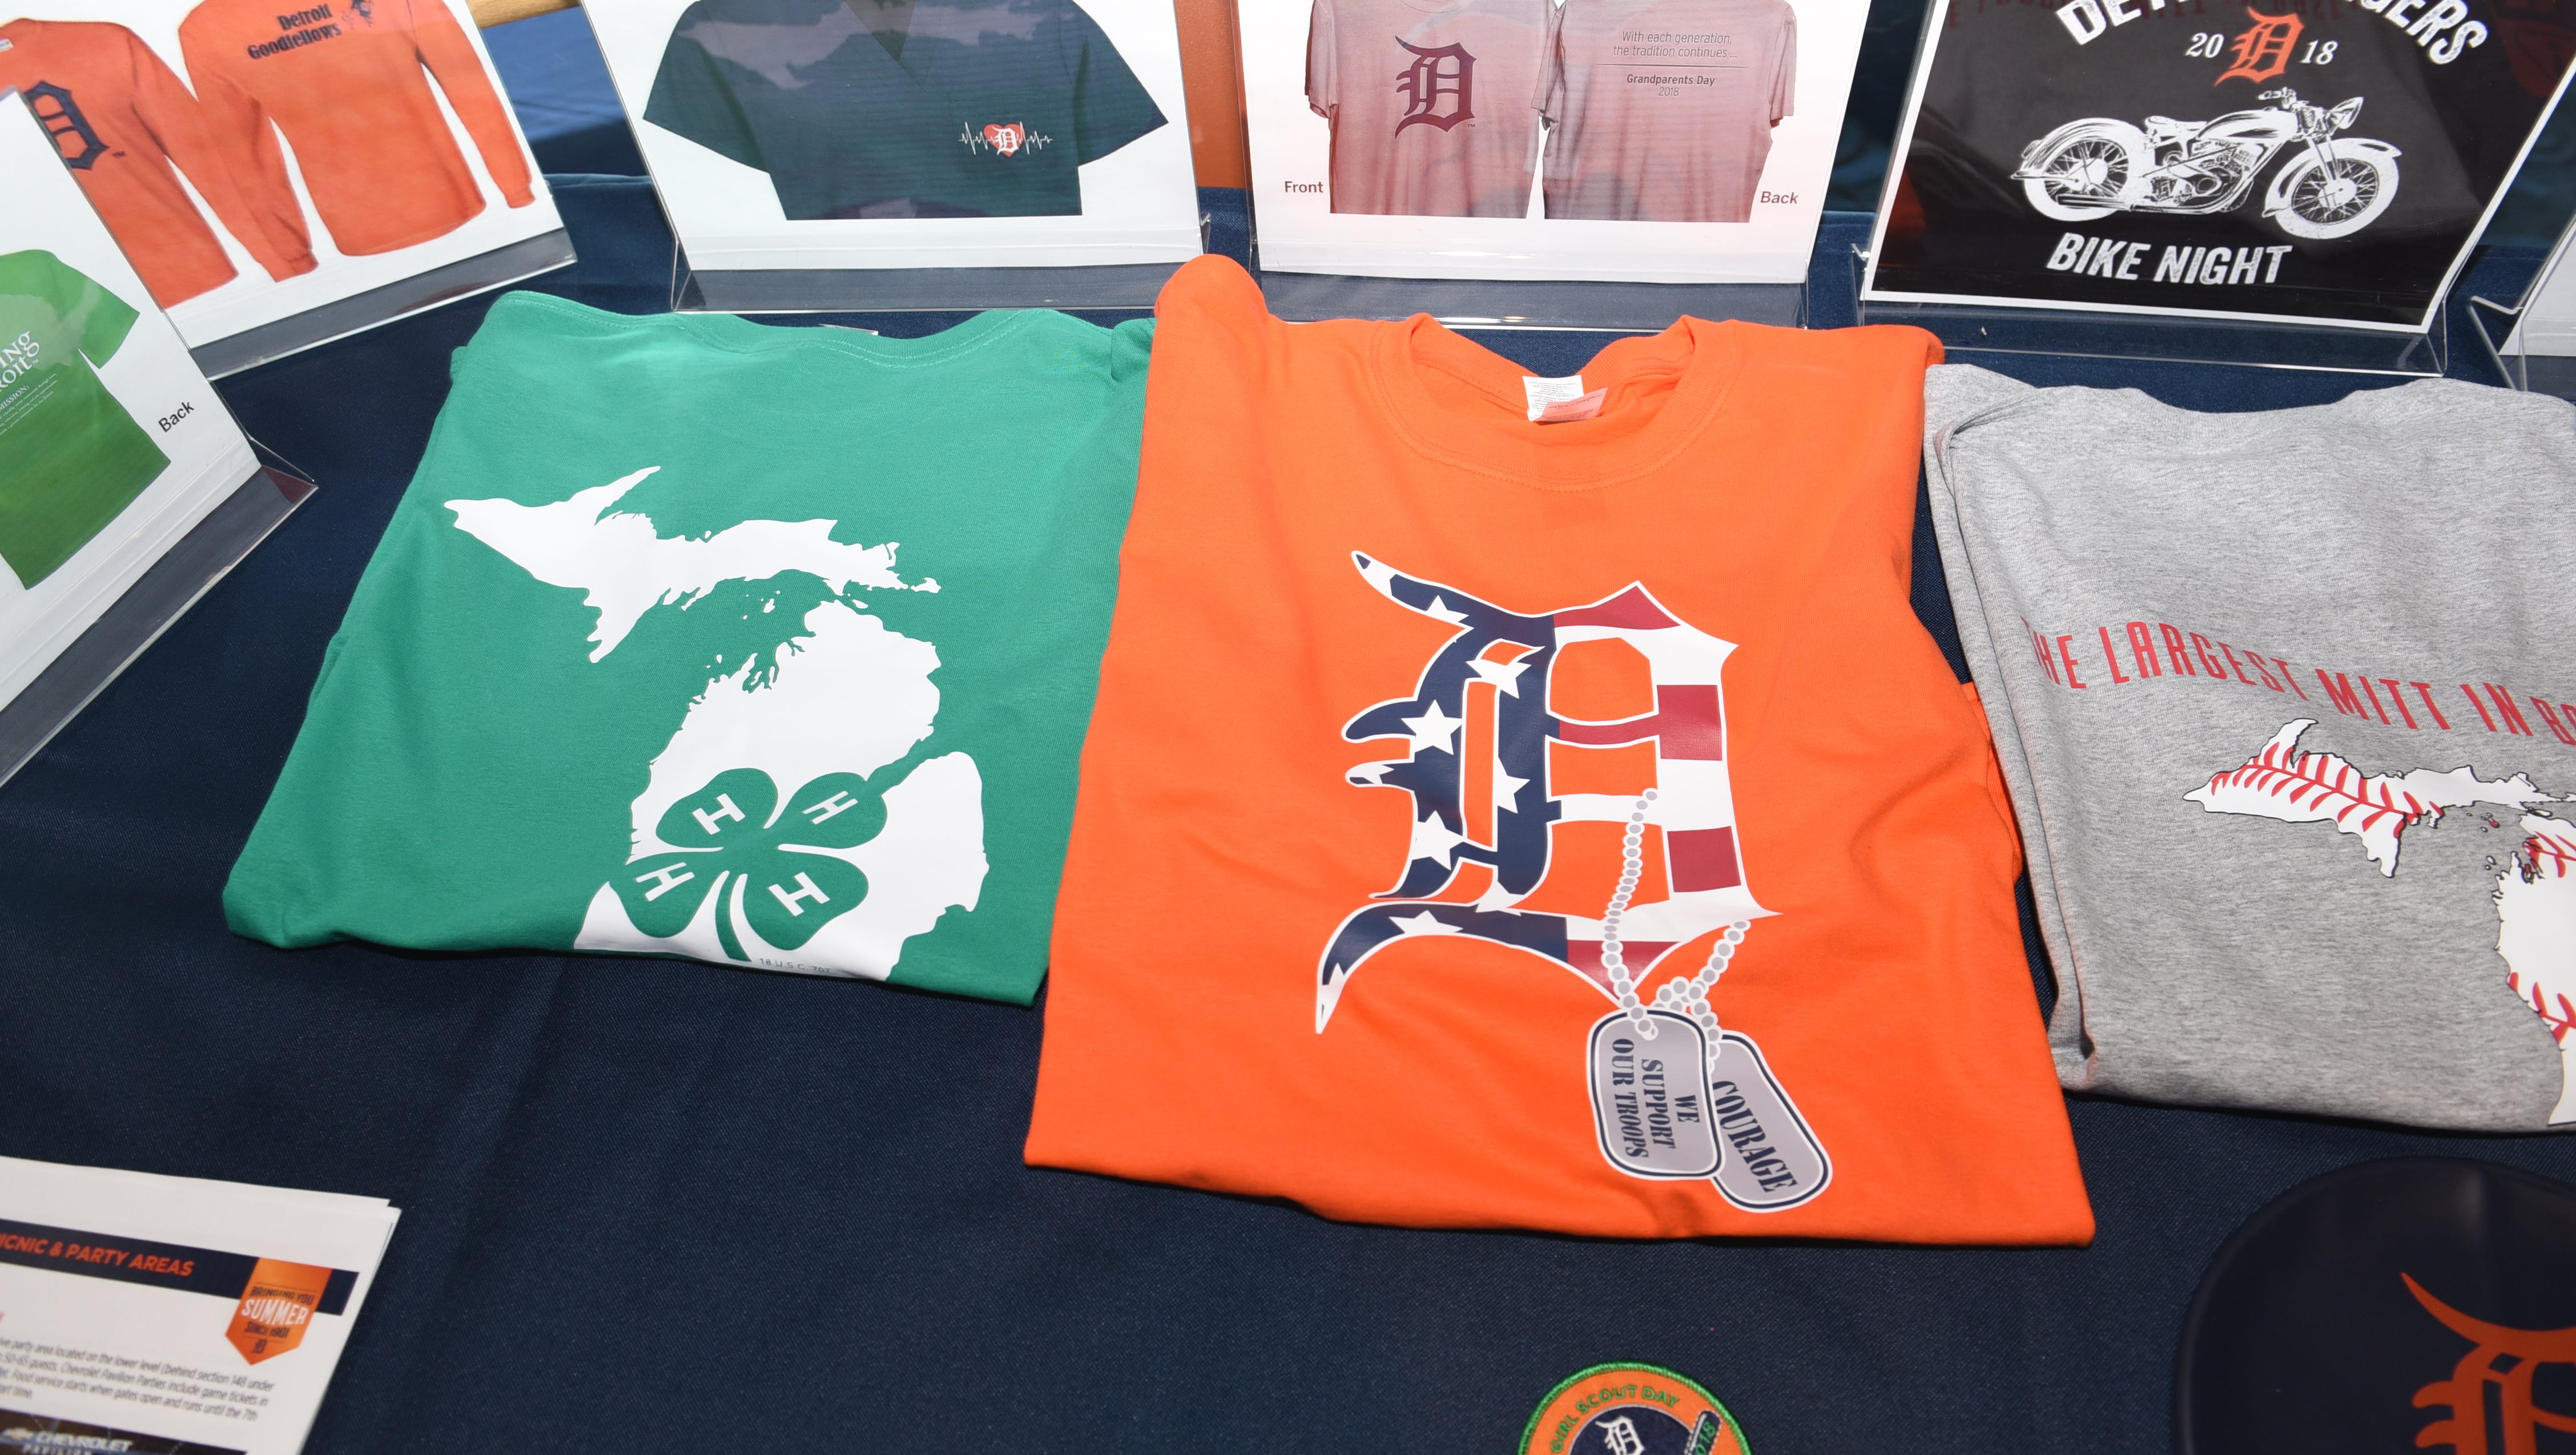 New merchandise was presented during a media event.